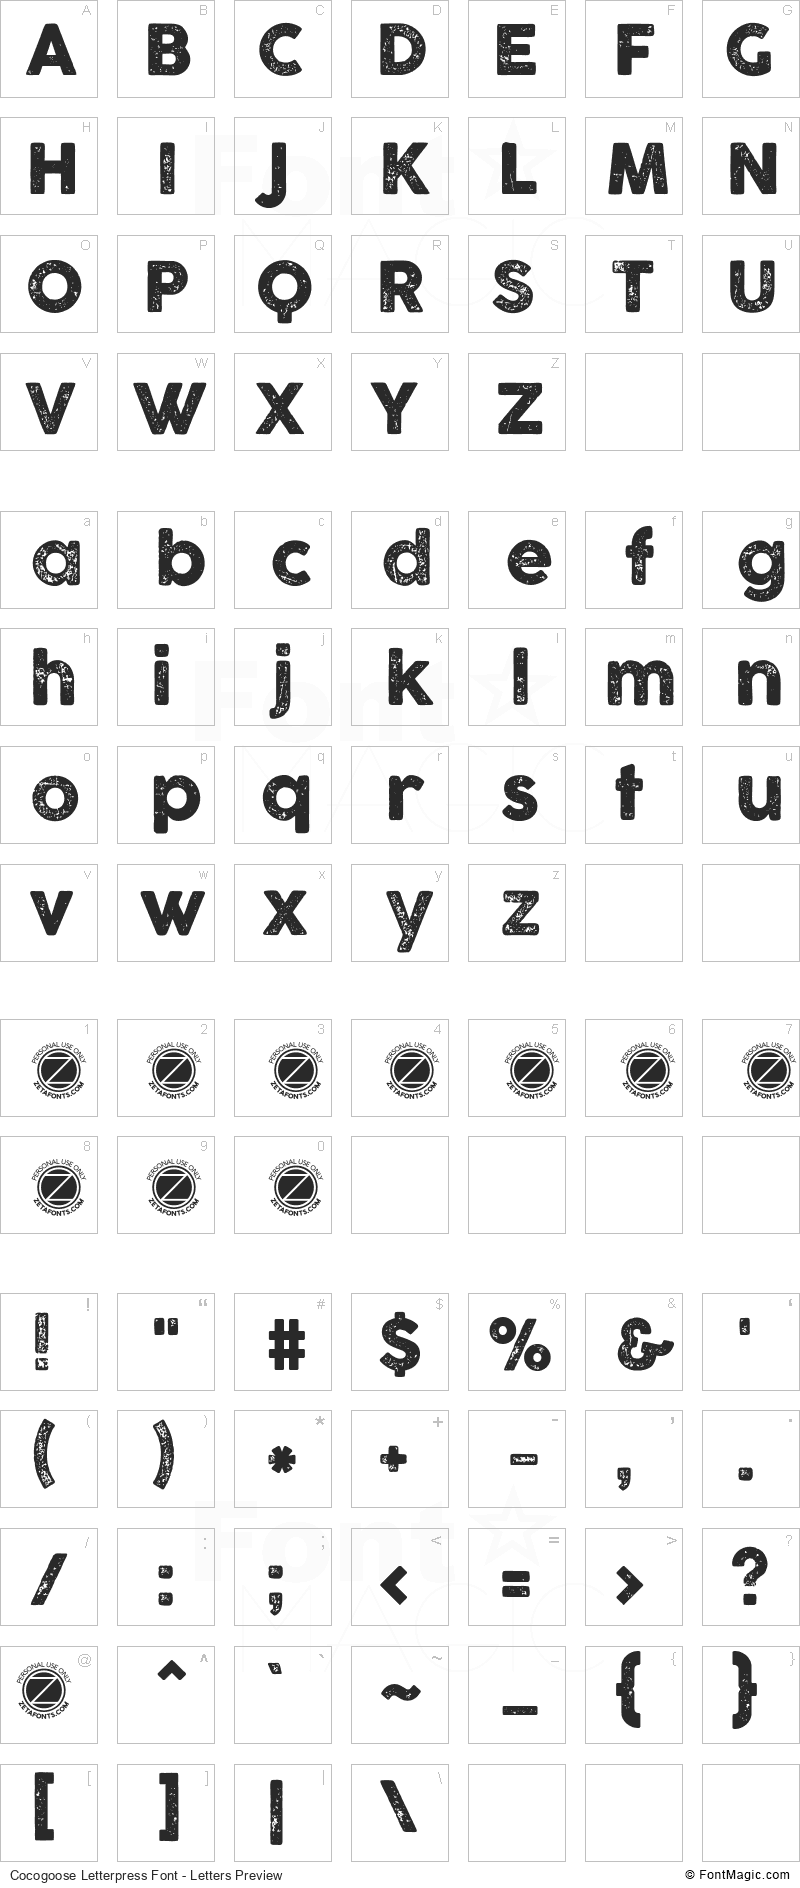 Cocogoose Letterpress Font - All Latters Preview Chart